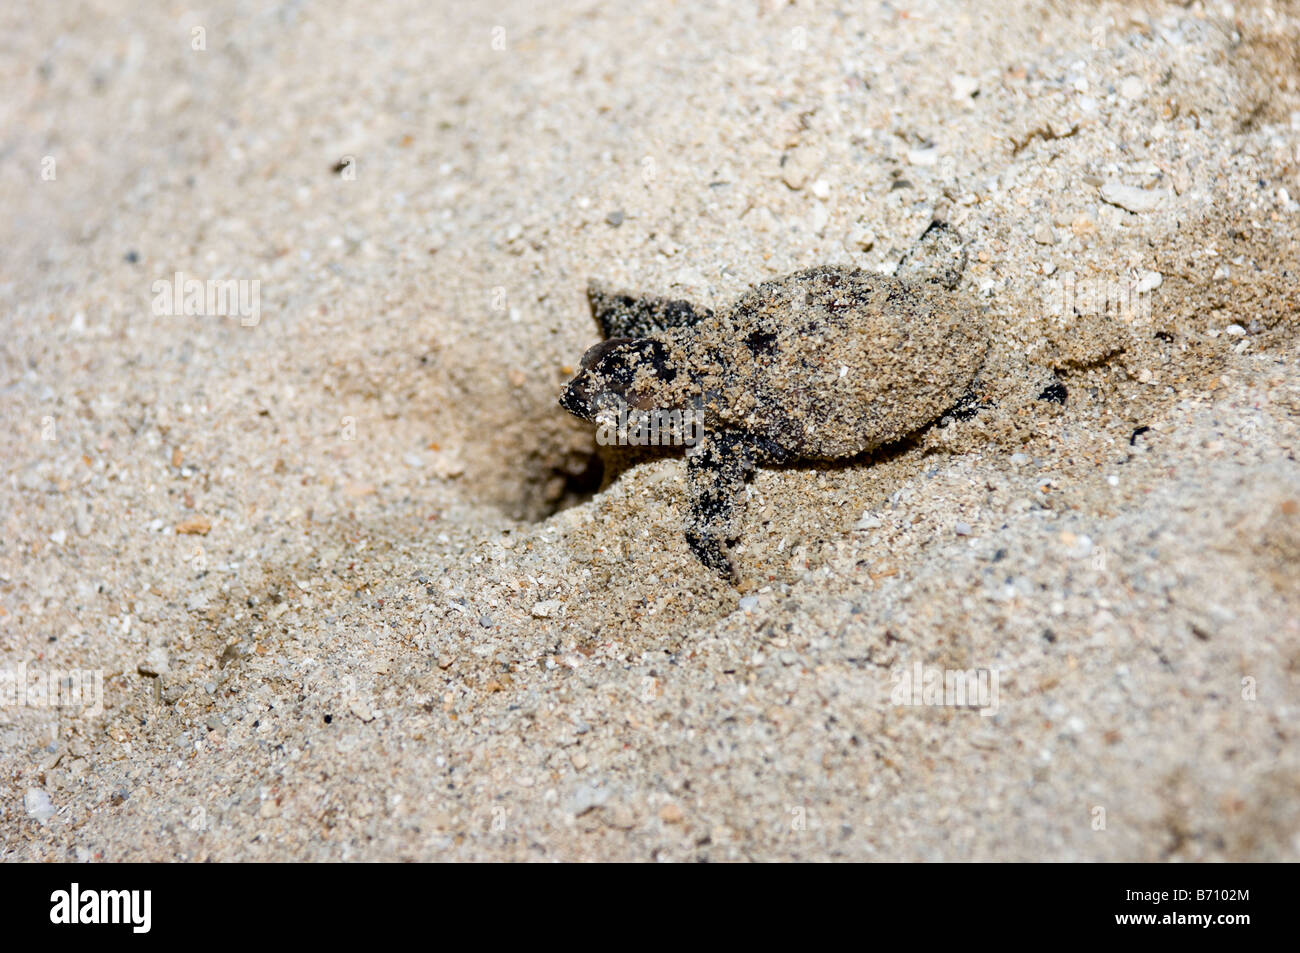 Hawksbill turtle hatchling crawling on the sand, Turtle Island National Park, Sabah, Malaysia. Stock Photo